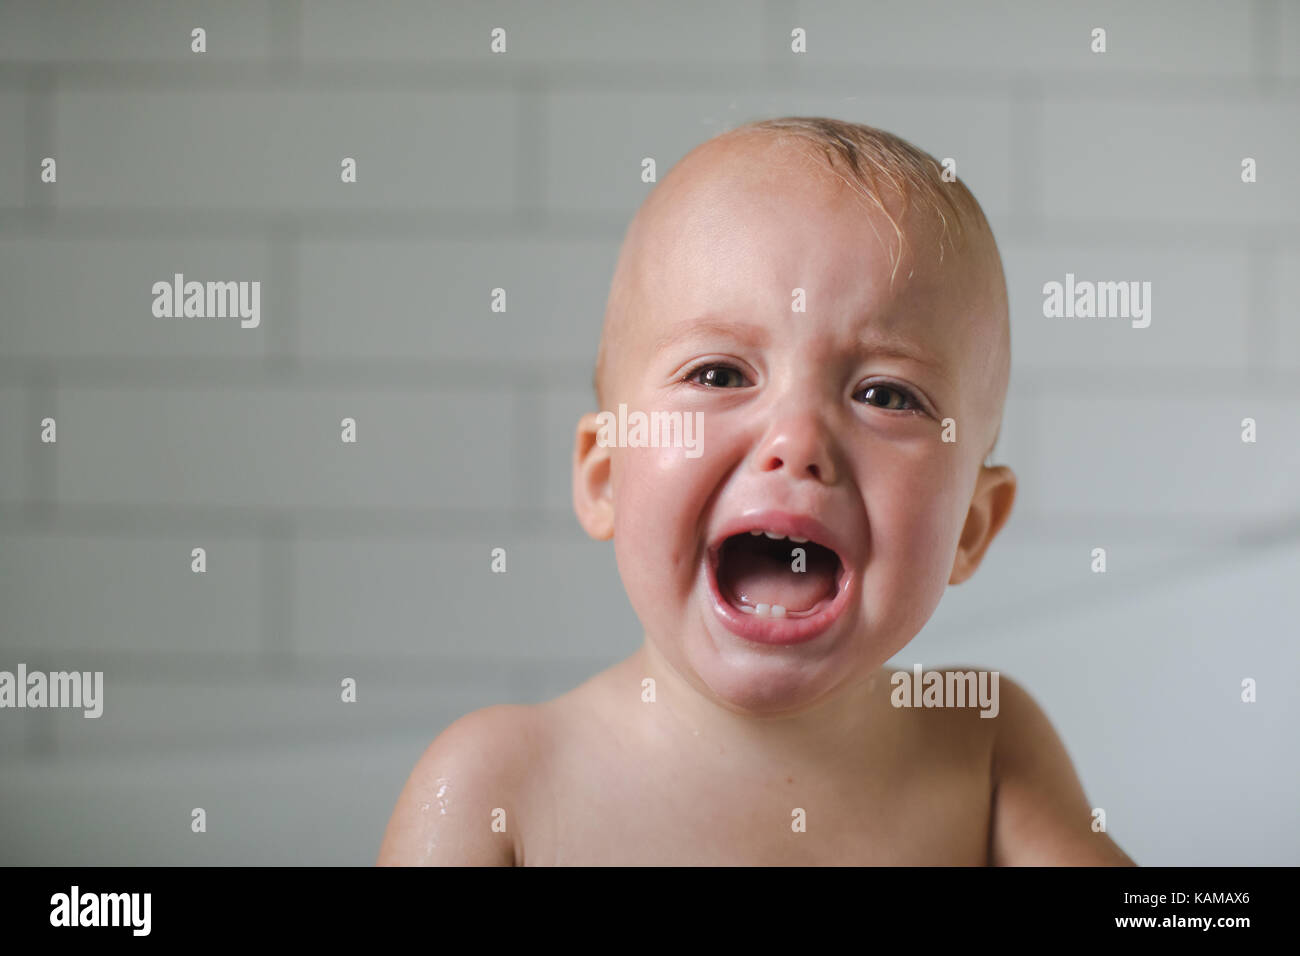 One-year-old baby cries close-up six teeth visible Stock Photo